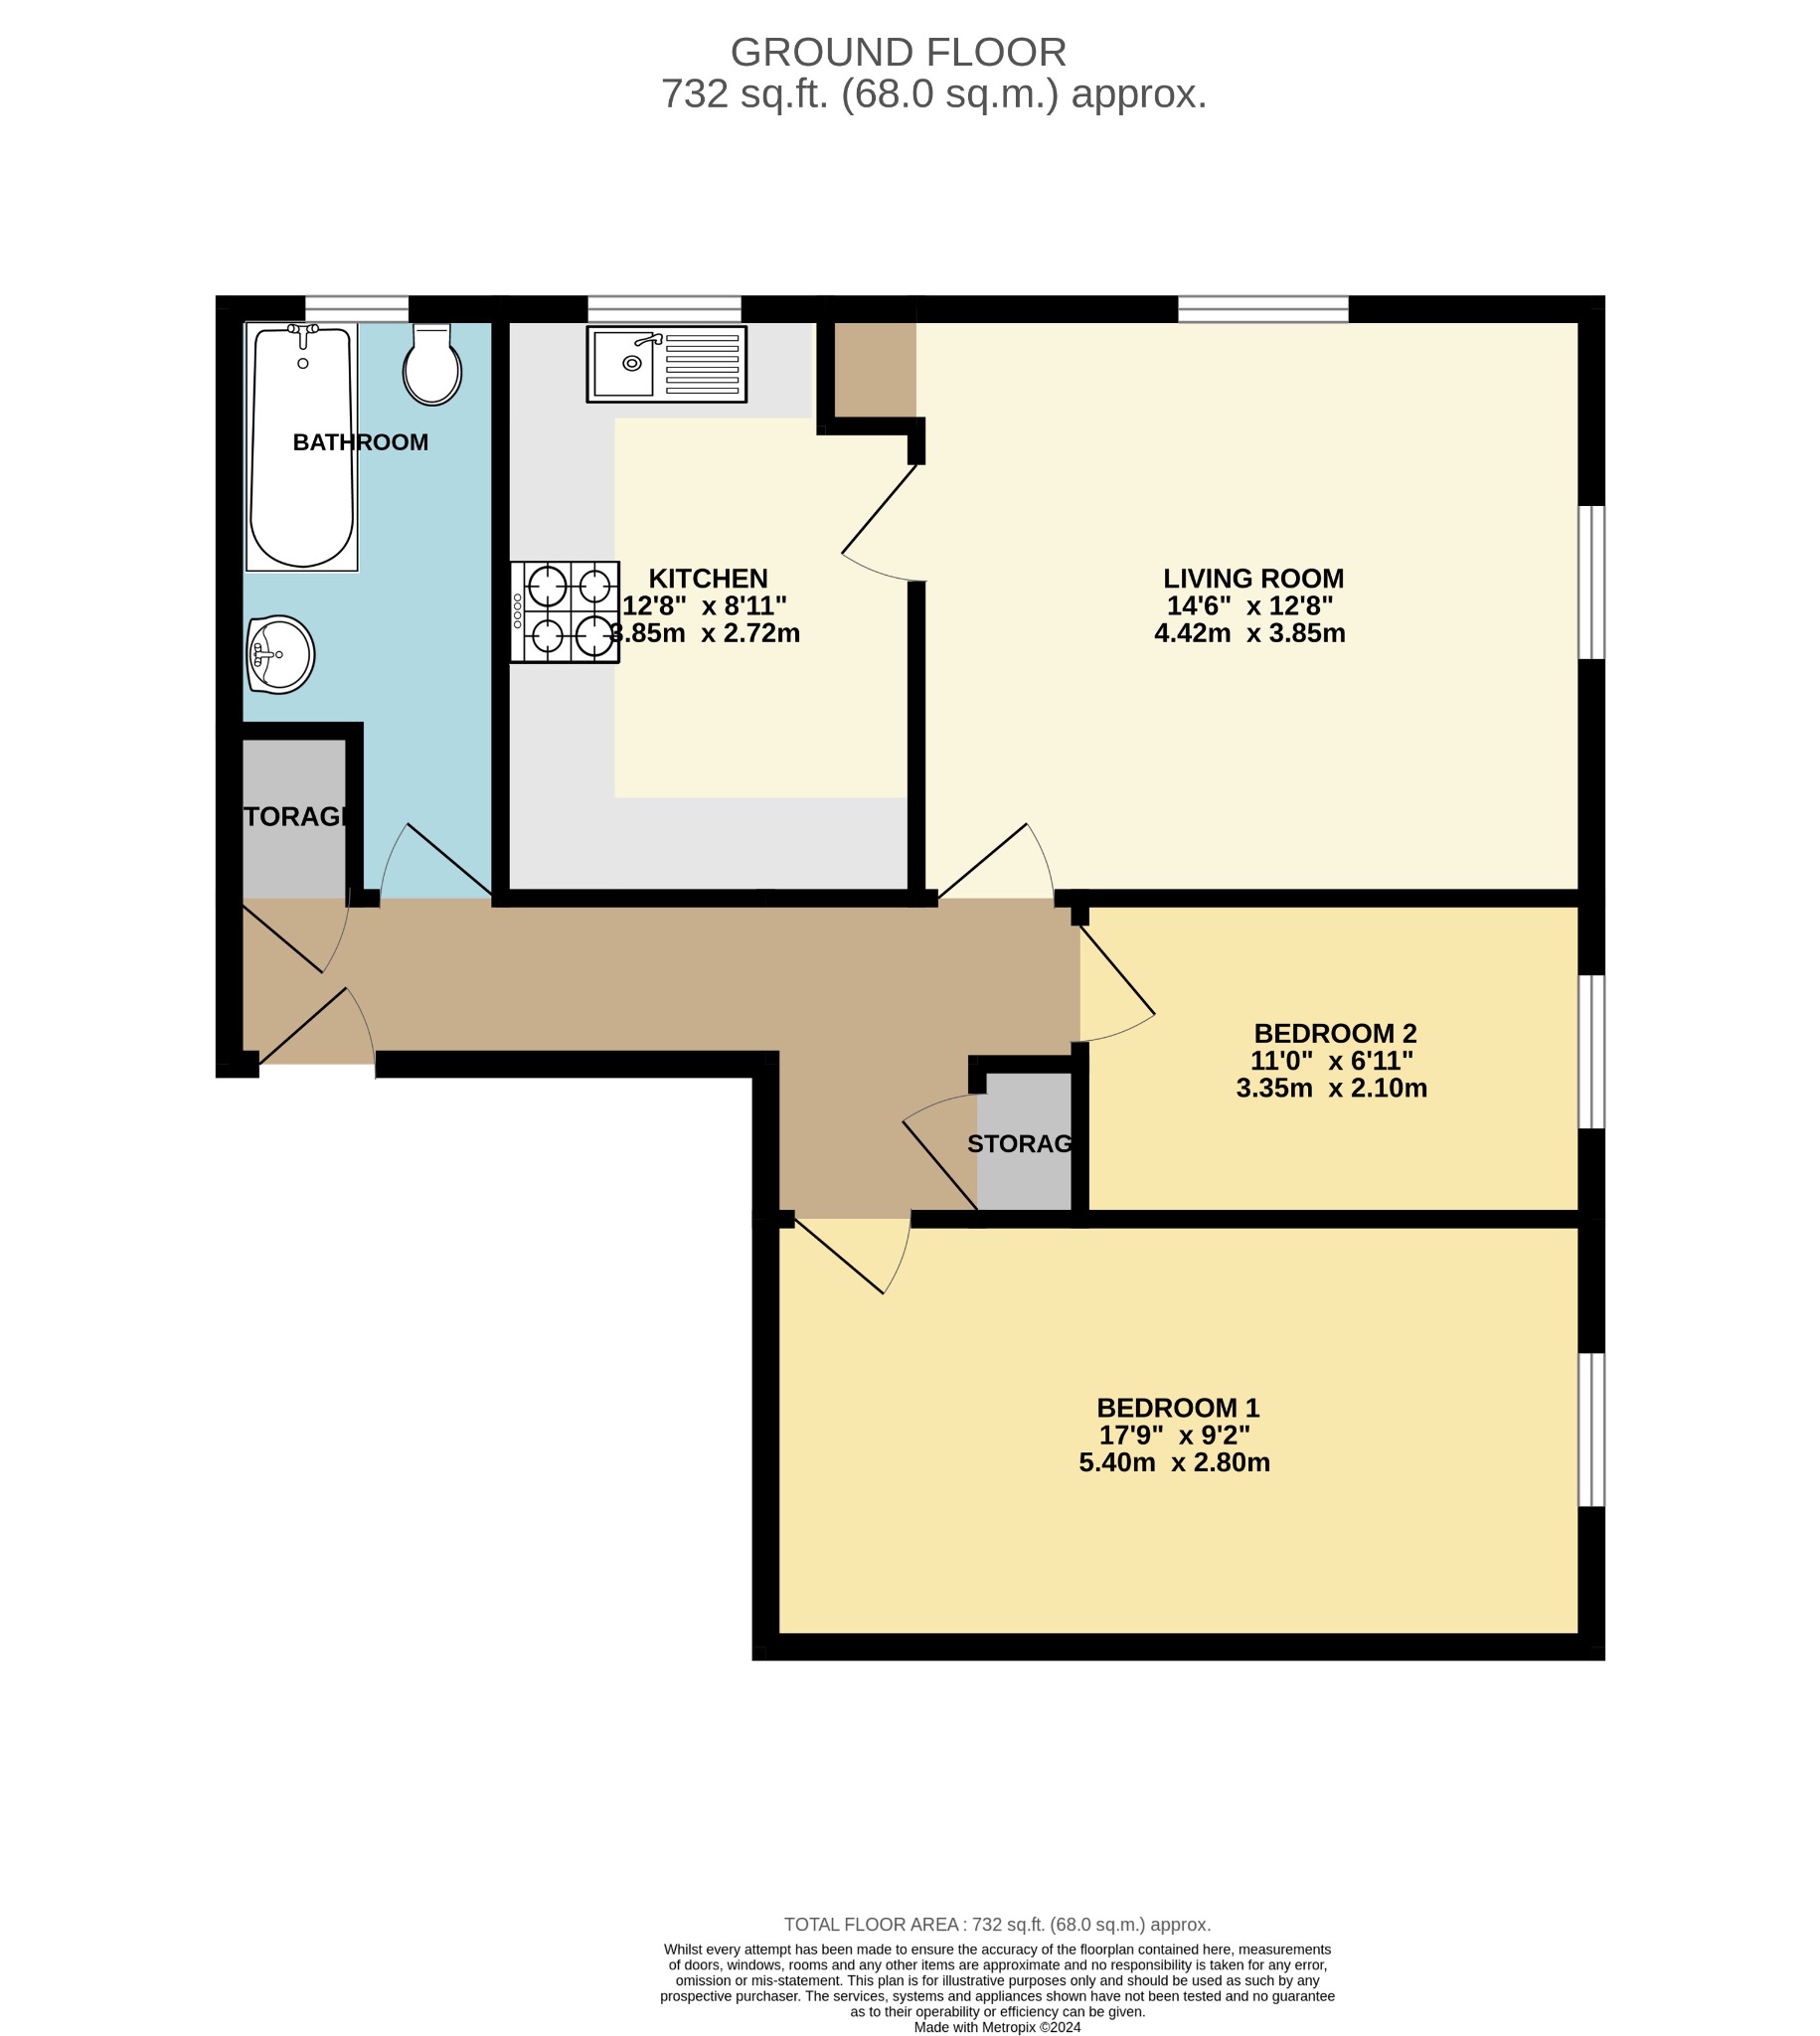 2 bed flat for sale in Monarch Drive, Reading - Property floorplan